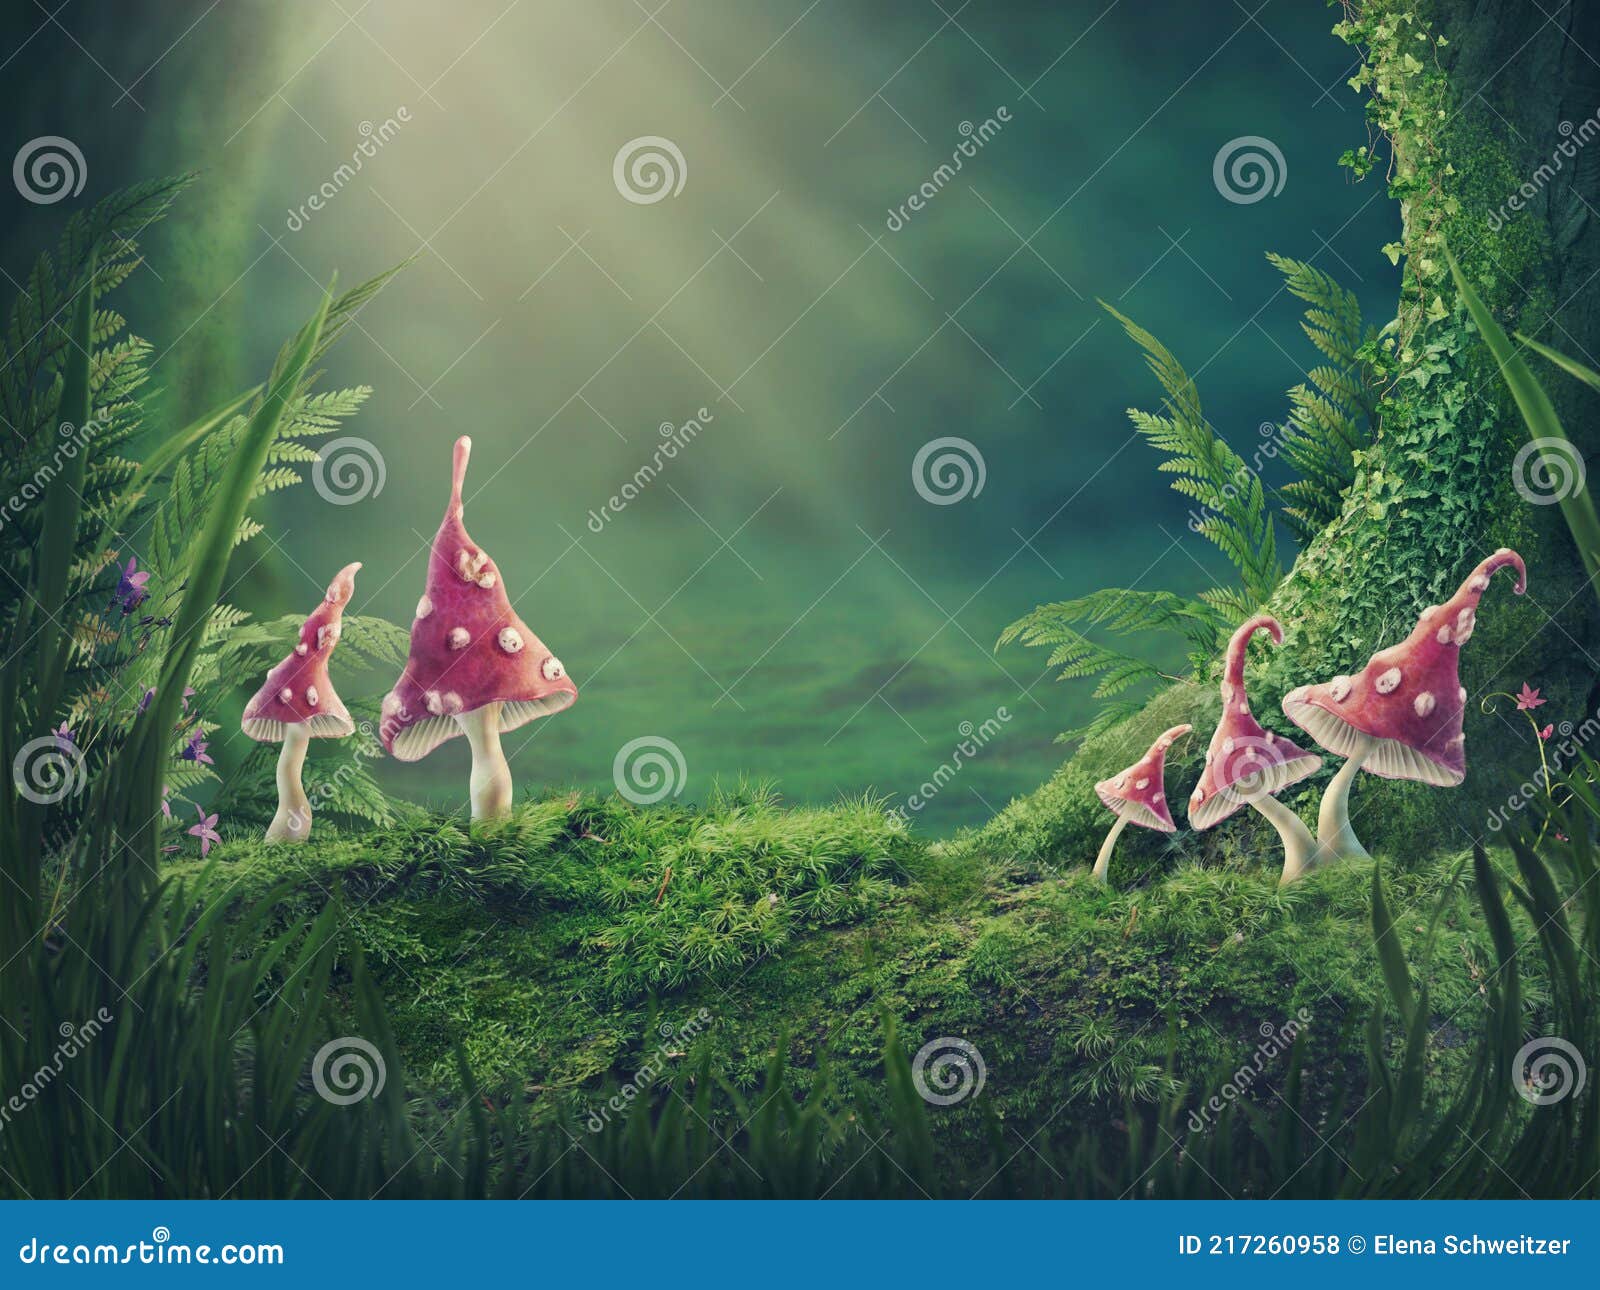 magic forest background